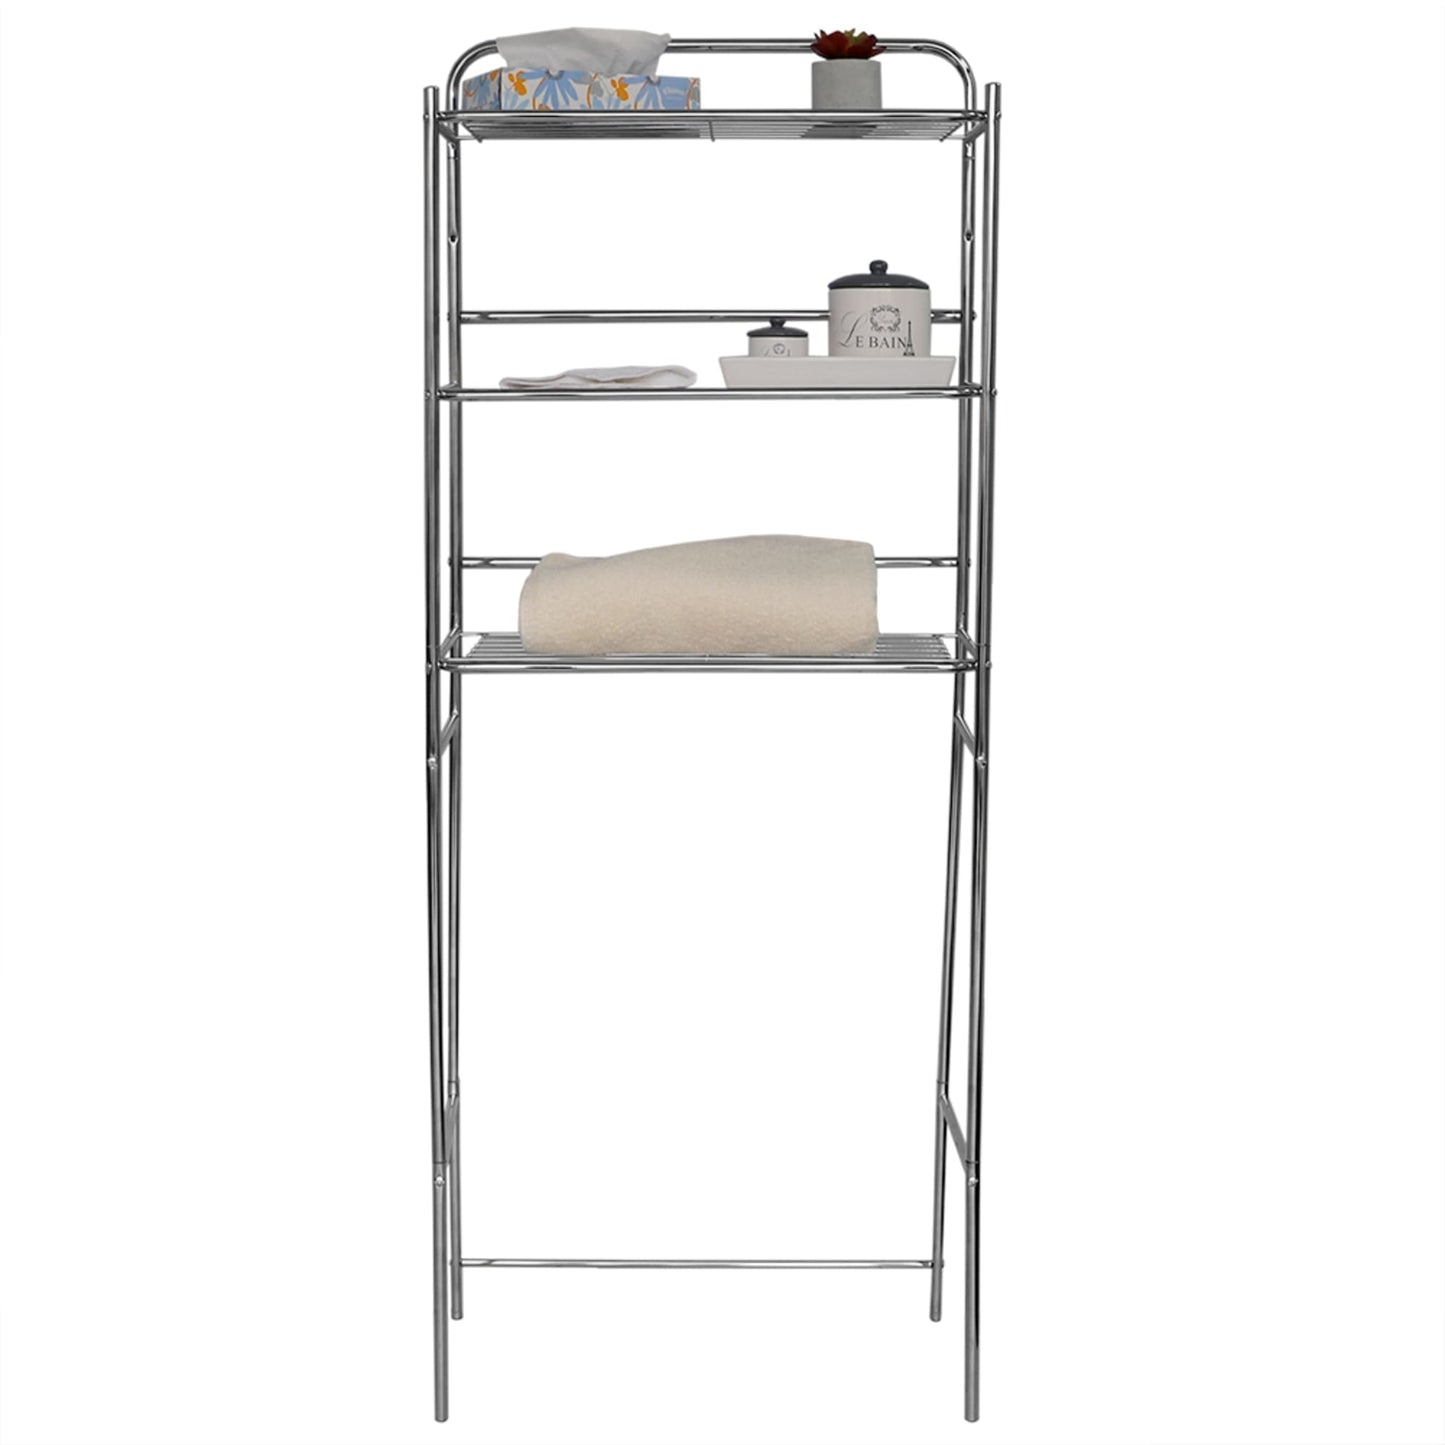 Home Basics 3 Tier Steel Space Saver Over The Toilet Bathroom Shelf with Open Shelving, Chrome